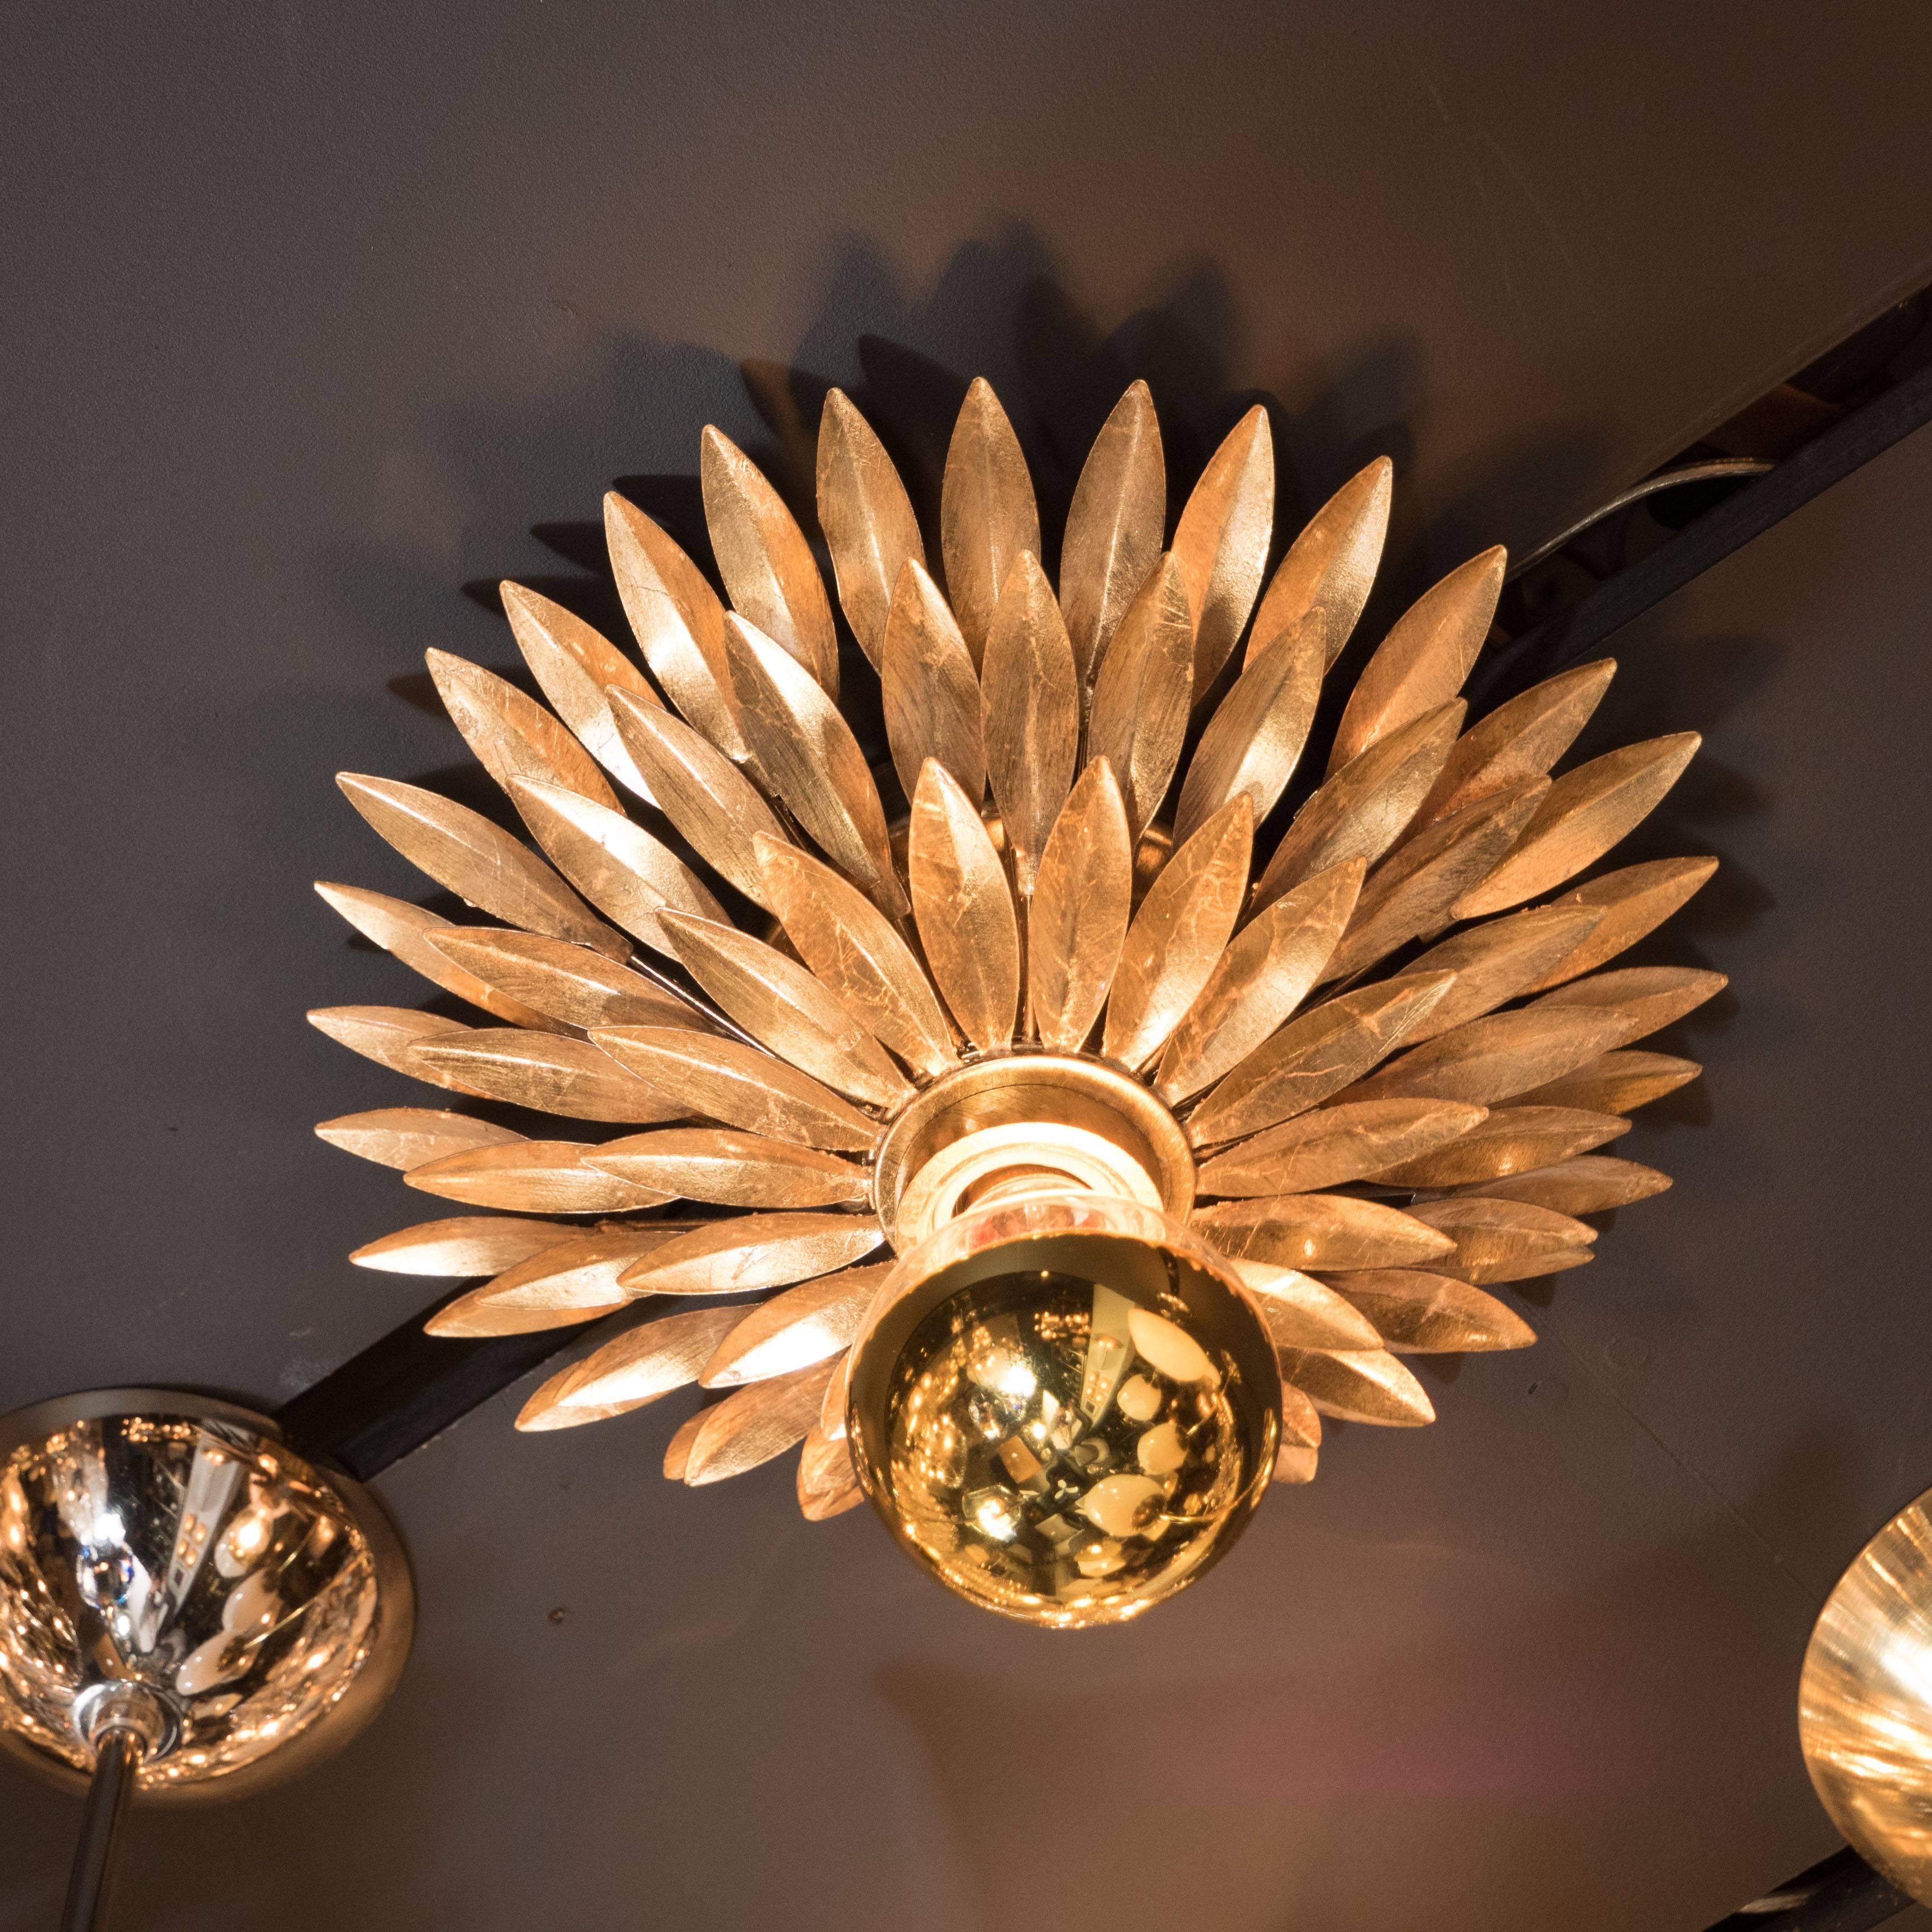 A pair of Hollywood Regency flush mount chandeliers with gilded leaf starburst detailing. A central Edison-based socket is surrounded by three layers of overlapping, individually cut gilded leaves, forming a starburst pattern. The light source